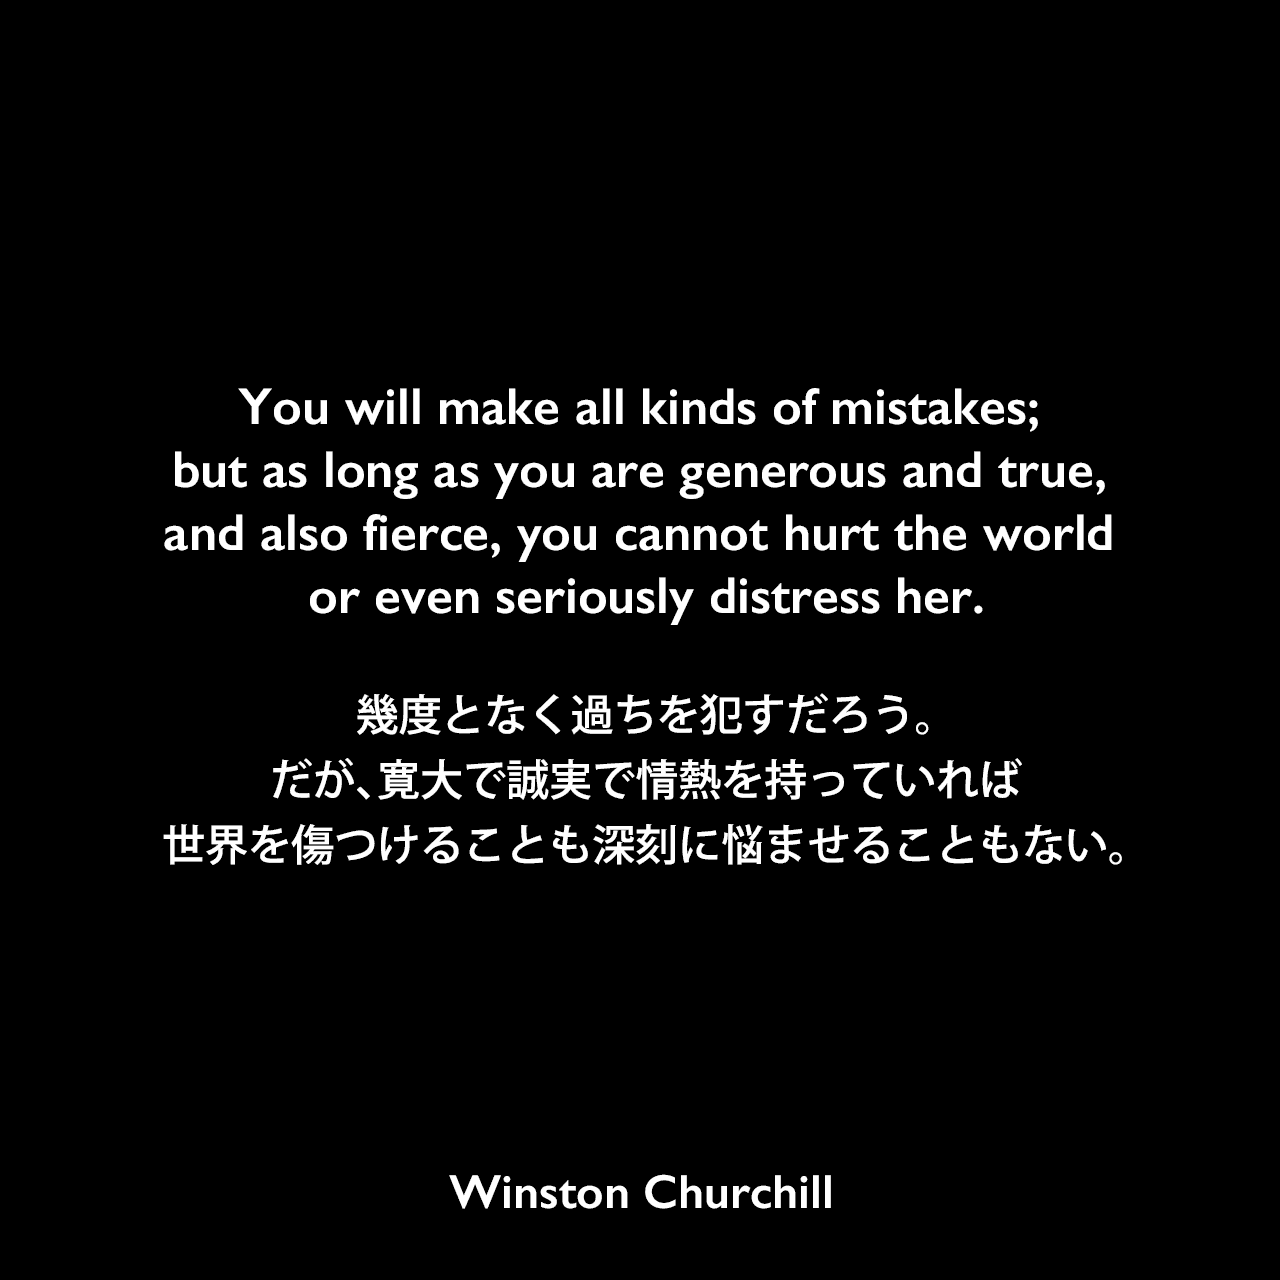 You will make all kinds of mistakes; but as long as you are generous and true, and also fierce, you cannot hurt the world or even seriously distress her.幾度となく過ちを犯すだろう。だが、寛大で誠実で情熱を持っていれば、世界を傷つけることも深刻に悩ませることもない。- チャーチルの本「わが半生」よりWinston Churchill